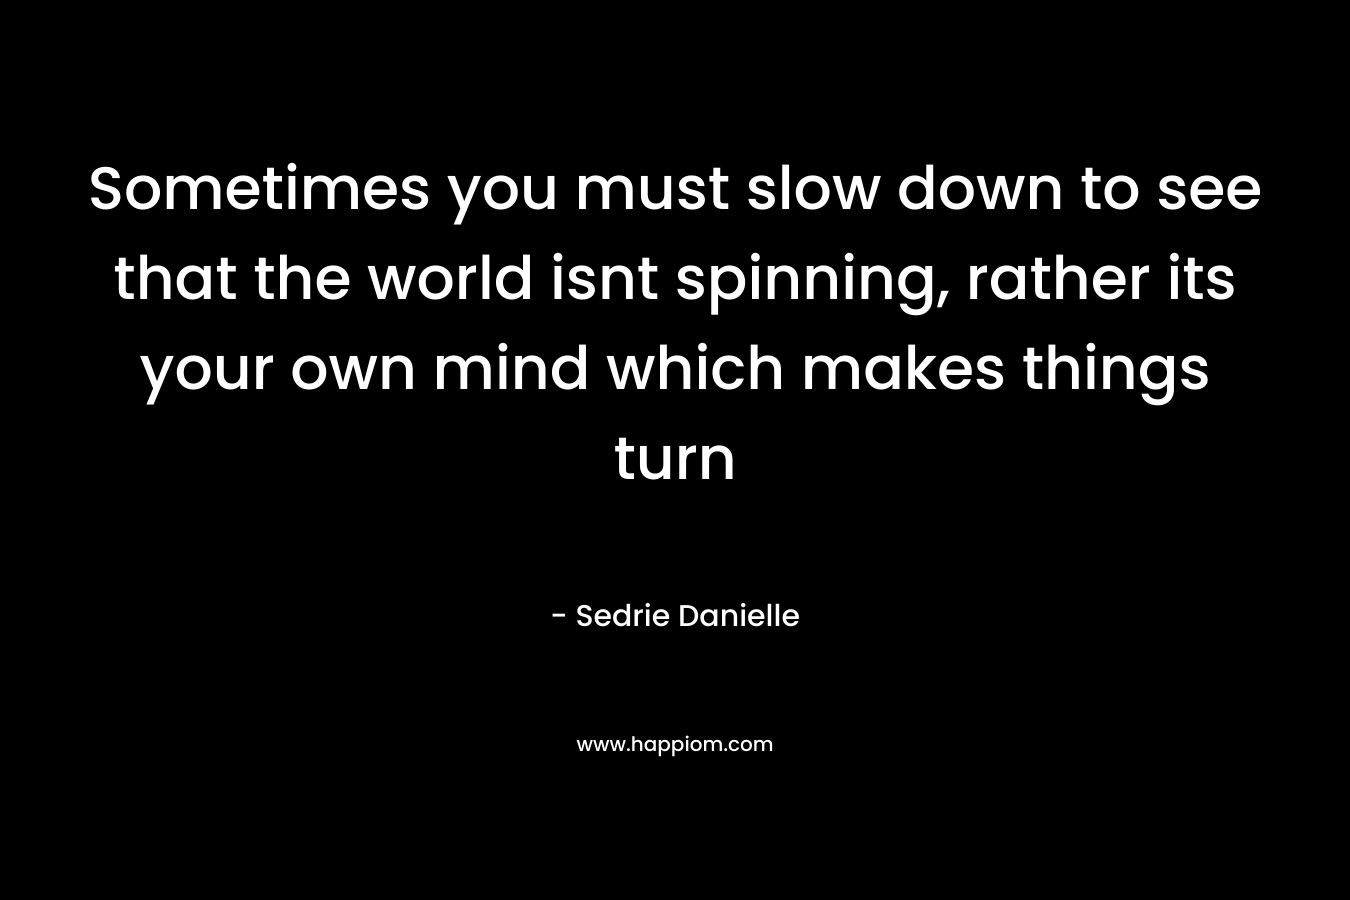 Sometimes you must slow down to see that the world isnt spinning, rather its your own mind which makes things turn